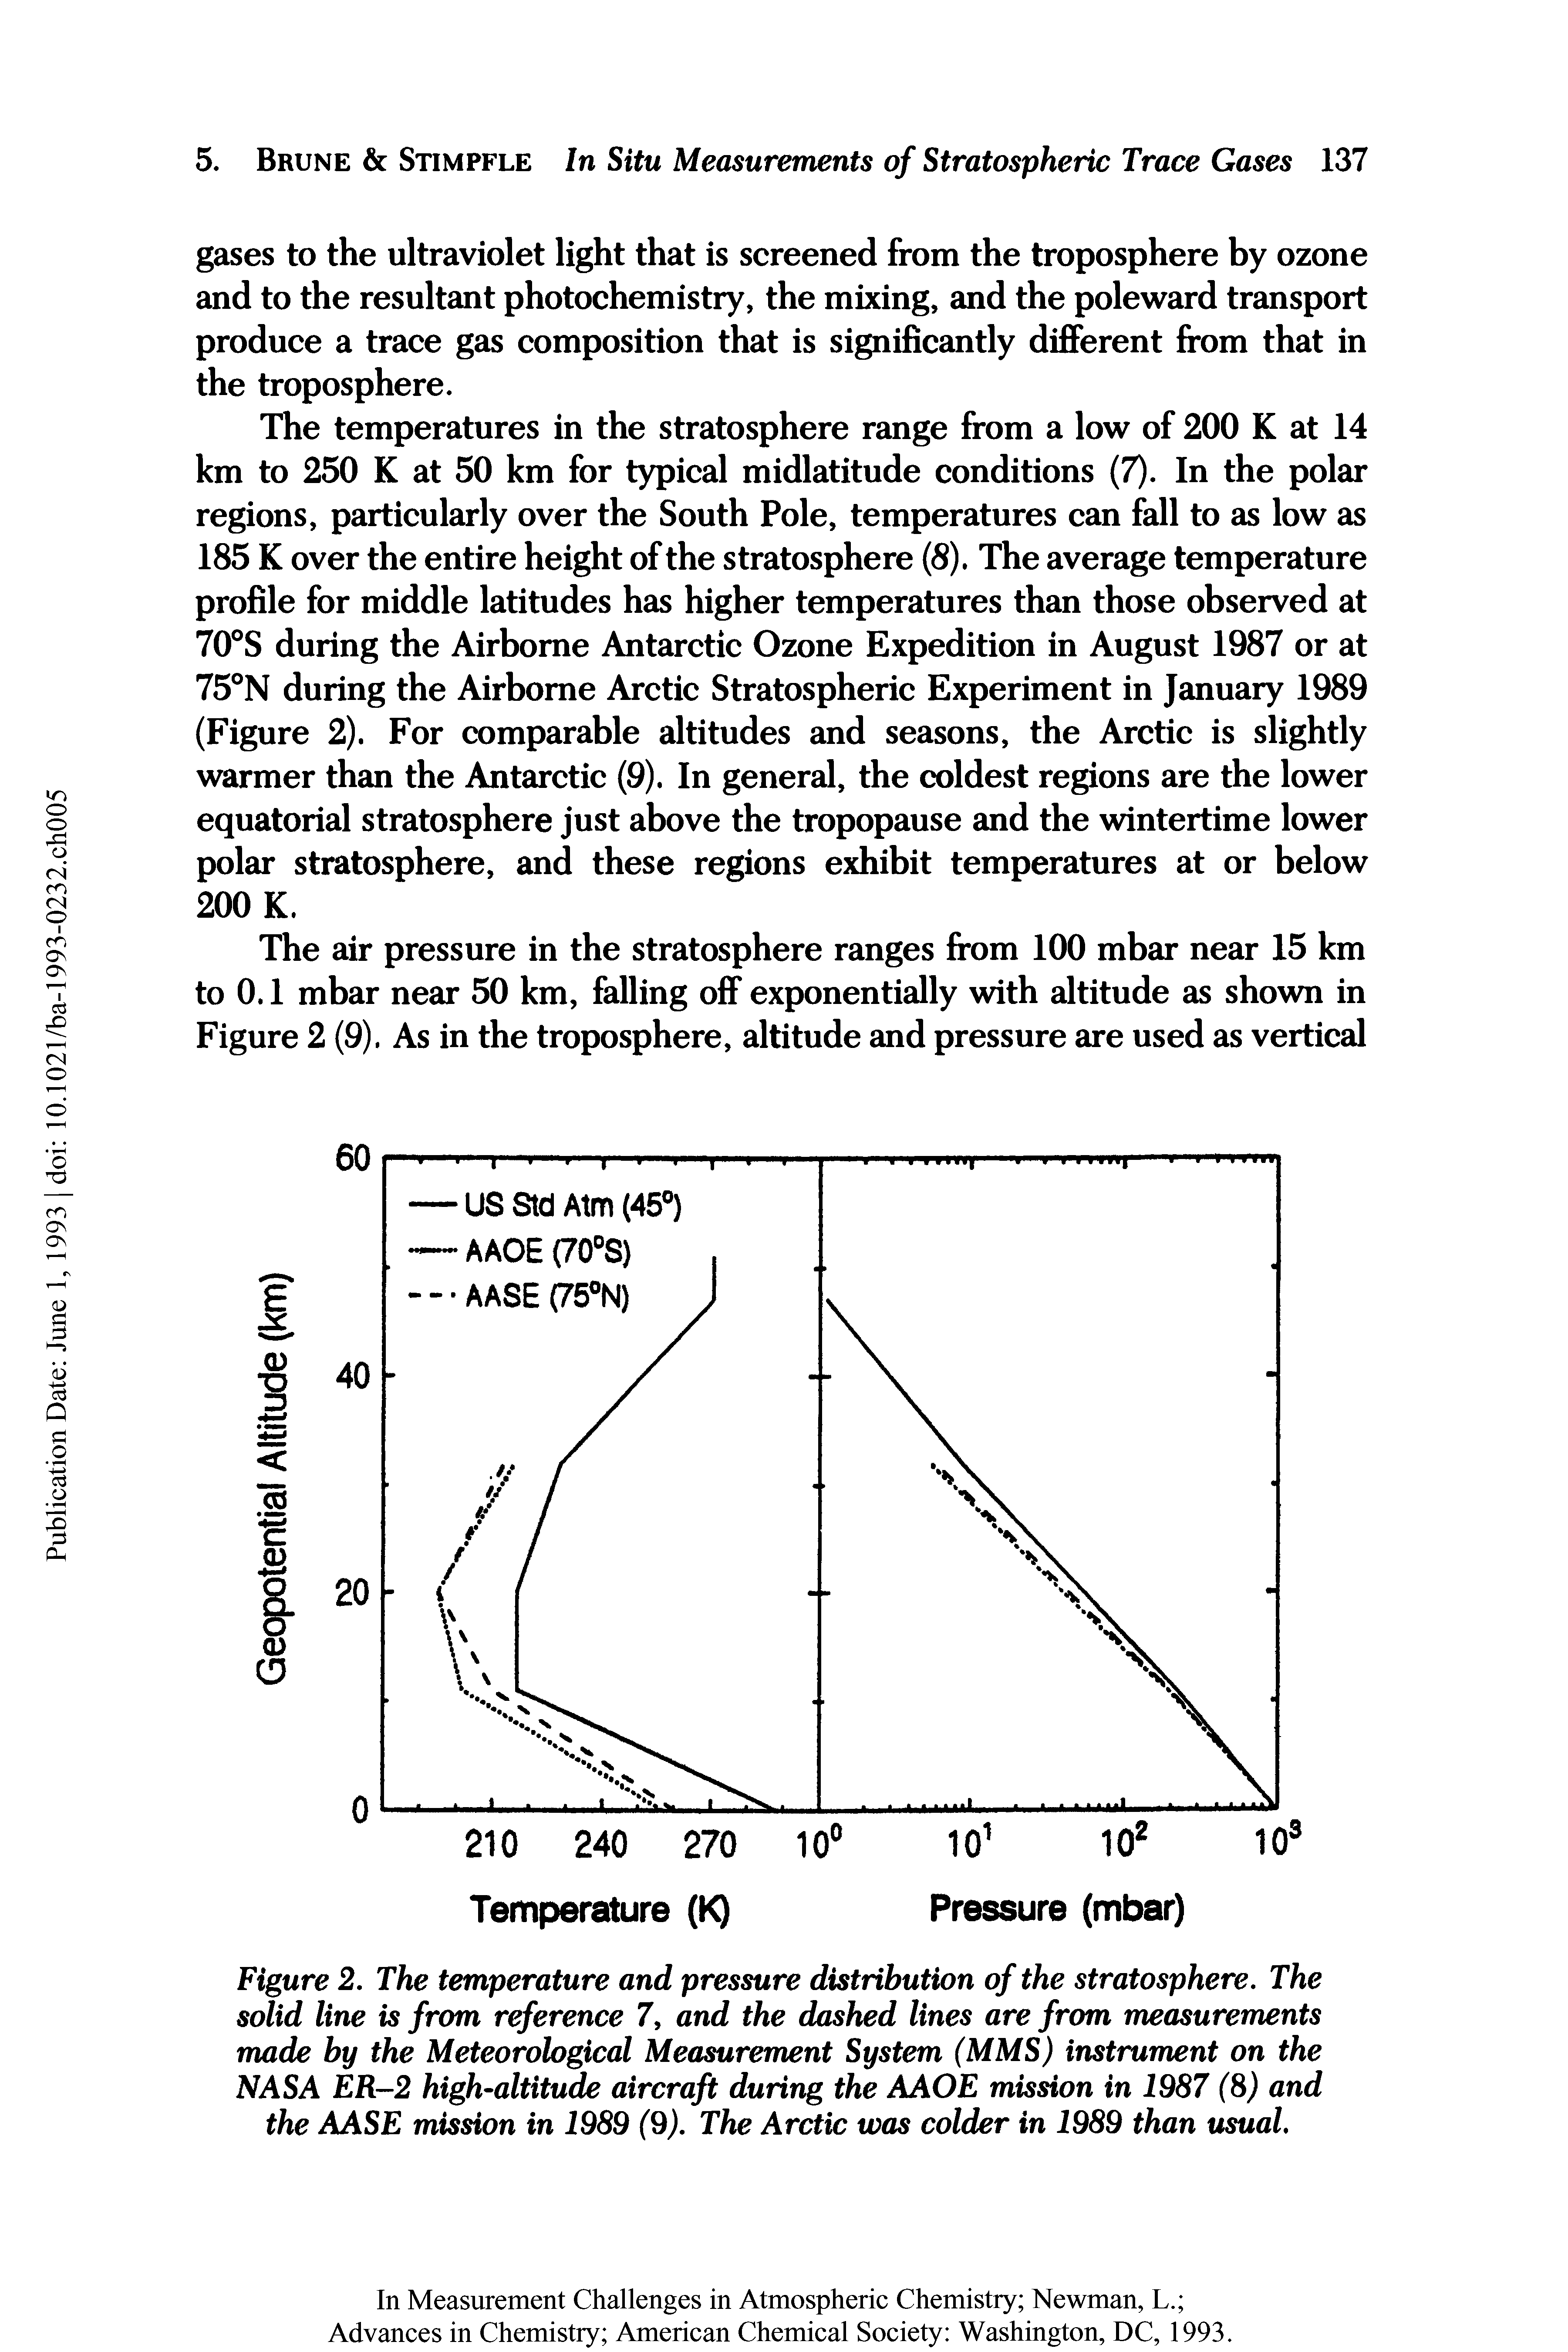 Figure 2. The temperature and pressure distribution of the stratosphere. The solid line is from reference 7, and the dashed lines are from measurements made by the Meteorological Measurement System (MMS) instrument on the NASA ER-2 high-altitude aircraft during the AAOE mission in 1987 (8) and the AASE mission in 1989 (9). The Arctic was colder in 1989 than usual.